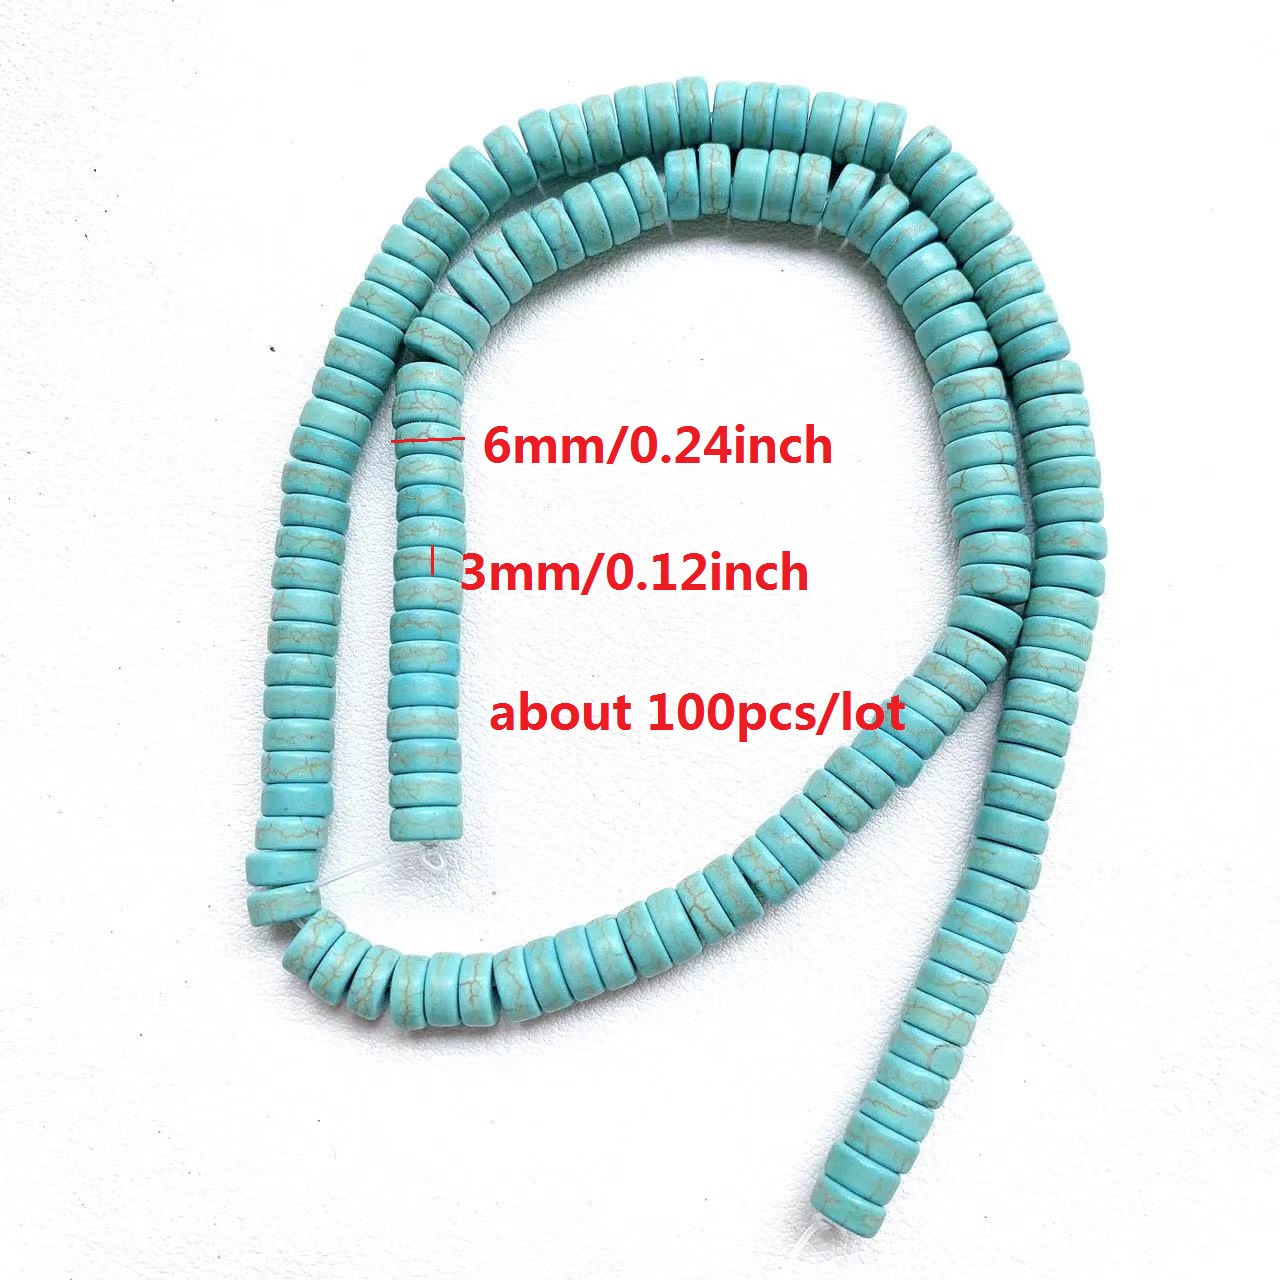 100pcs 6mm Blue Turquoise Beads Natural Gemstone Beads Loose Beads for  Crafting and Jewelry Making